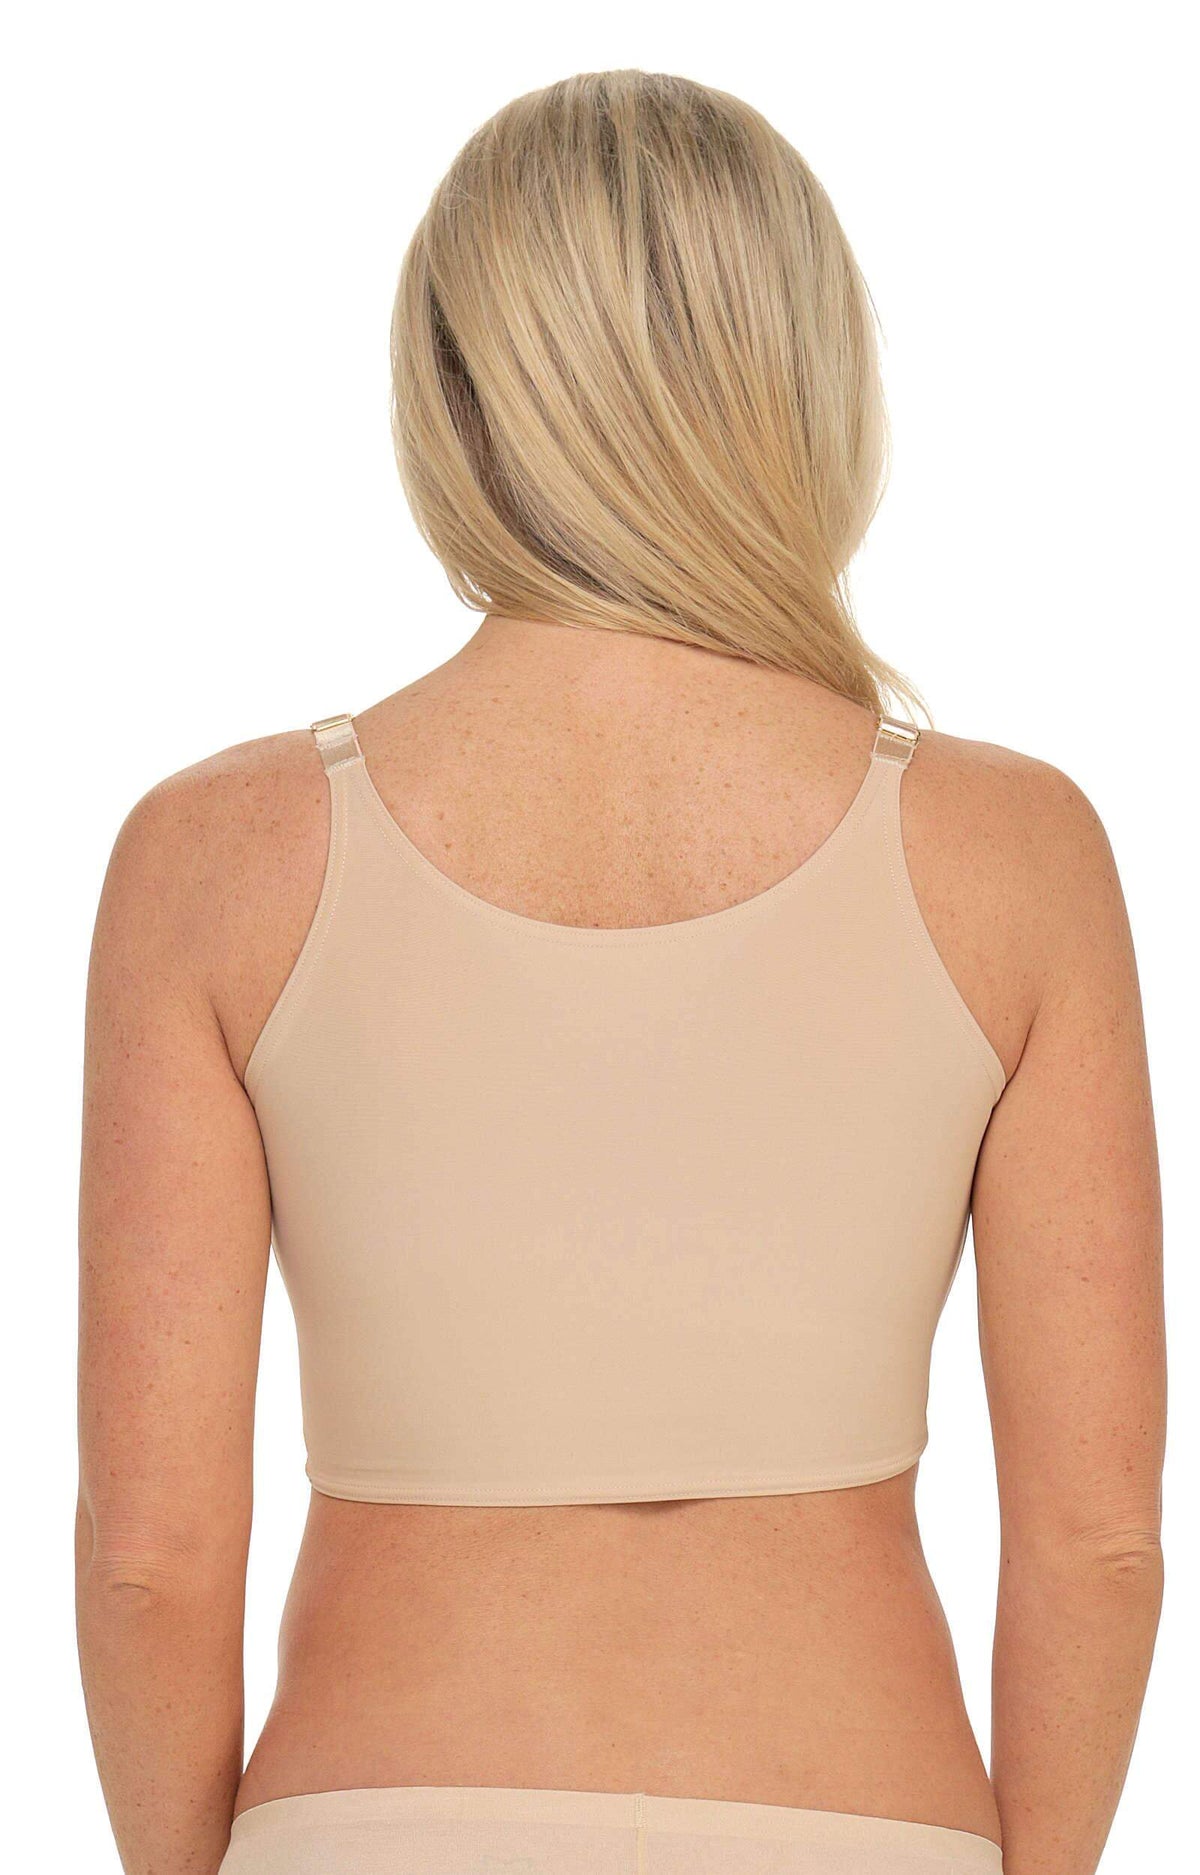 Shapeez – The Shortee, Full Coverage Bra, Back Smoothing Bras for Women,  Underwire Seamless Bra Back Fat Coverage, Lightweight Foam Padded Bra,  Nude, X-Small, A at  Women's Clothing store: Bras